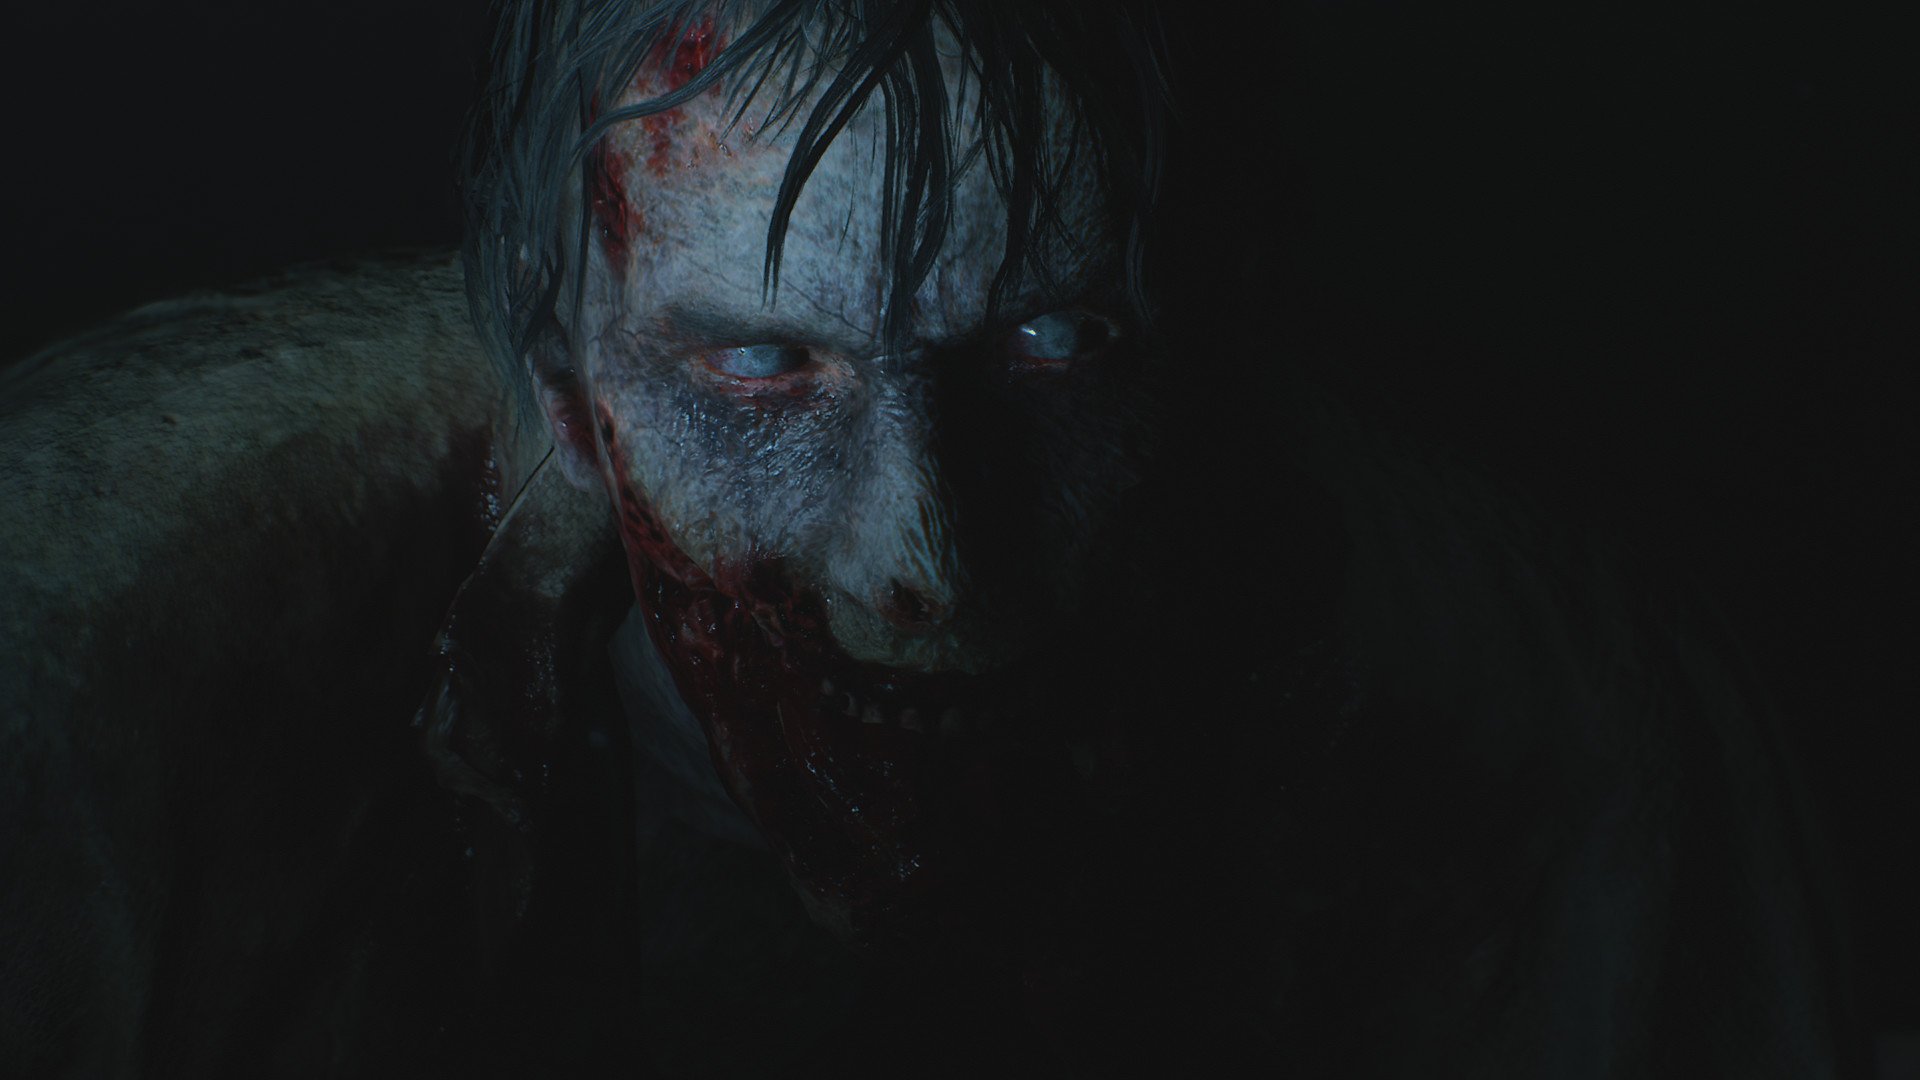 Review: Resident Evil 2 raises the bar for survival horror and video games  as a whole - MSPoweruser, resident evil 2 